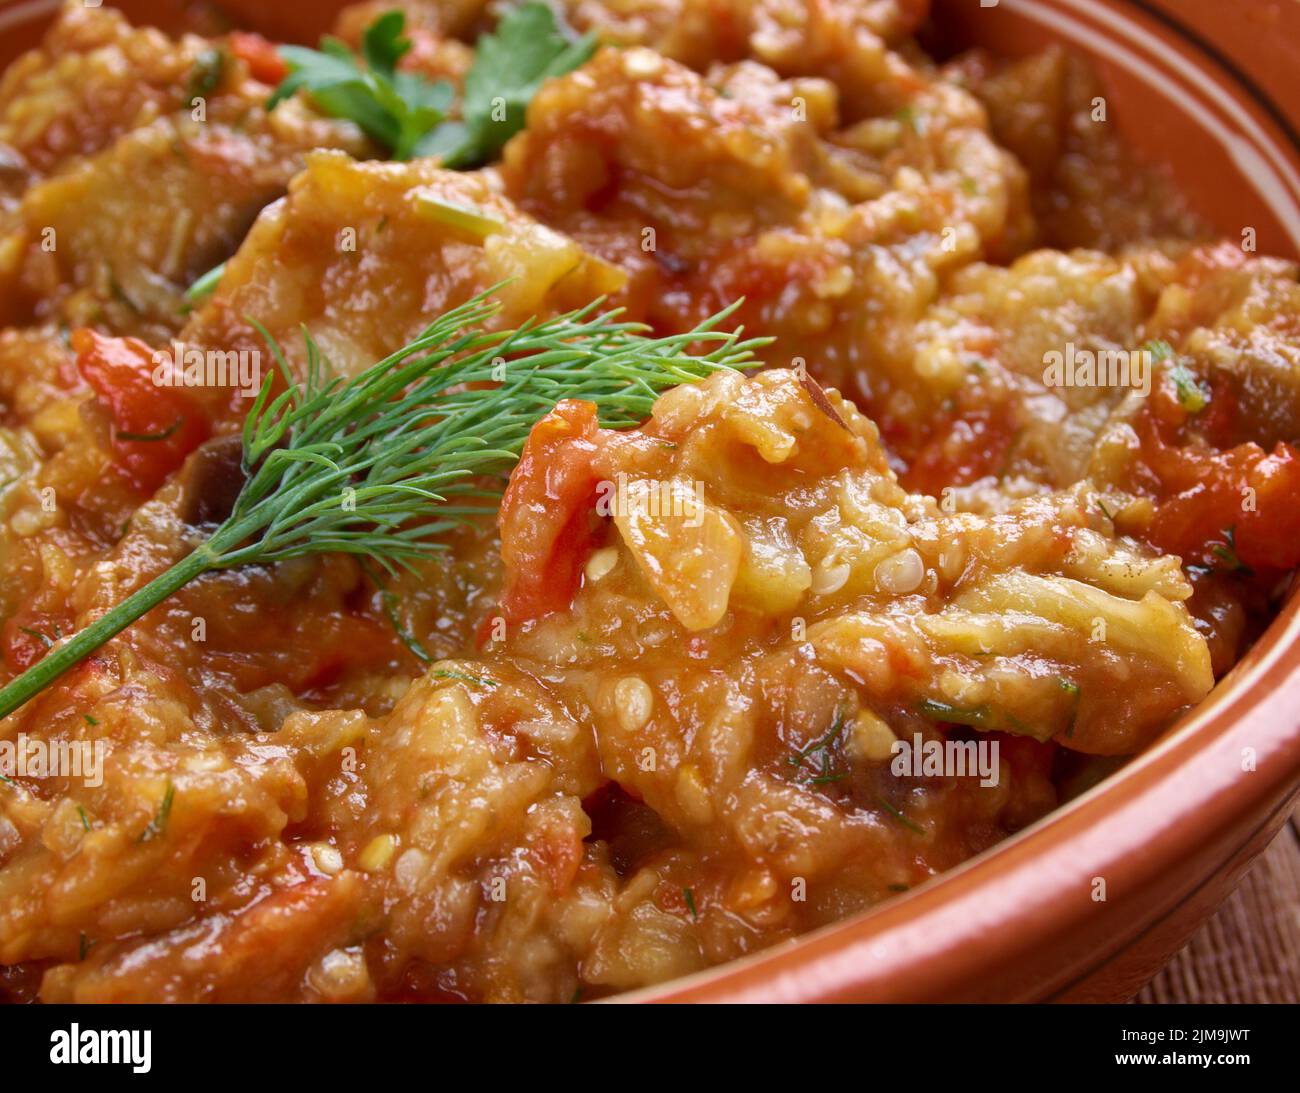 Torborgeece. - Traditional Stew From Lofa County, Liberia Stock Photo